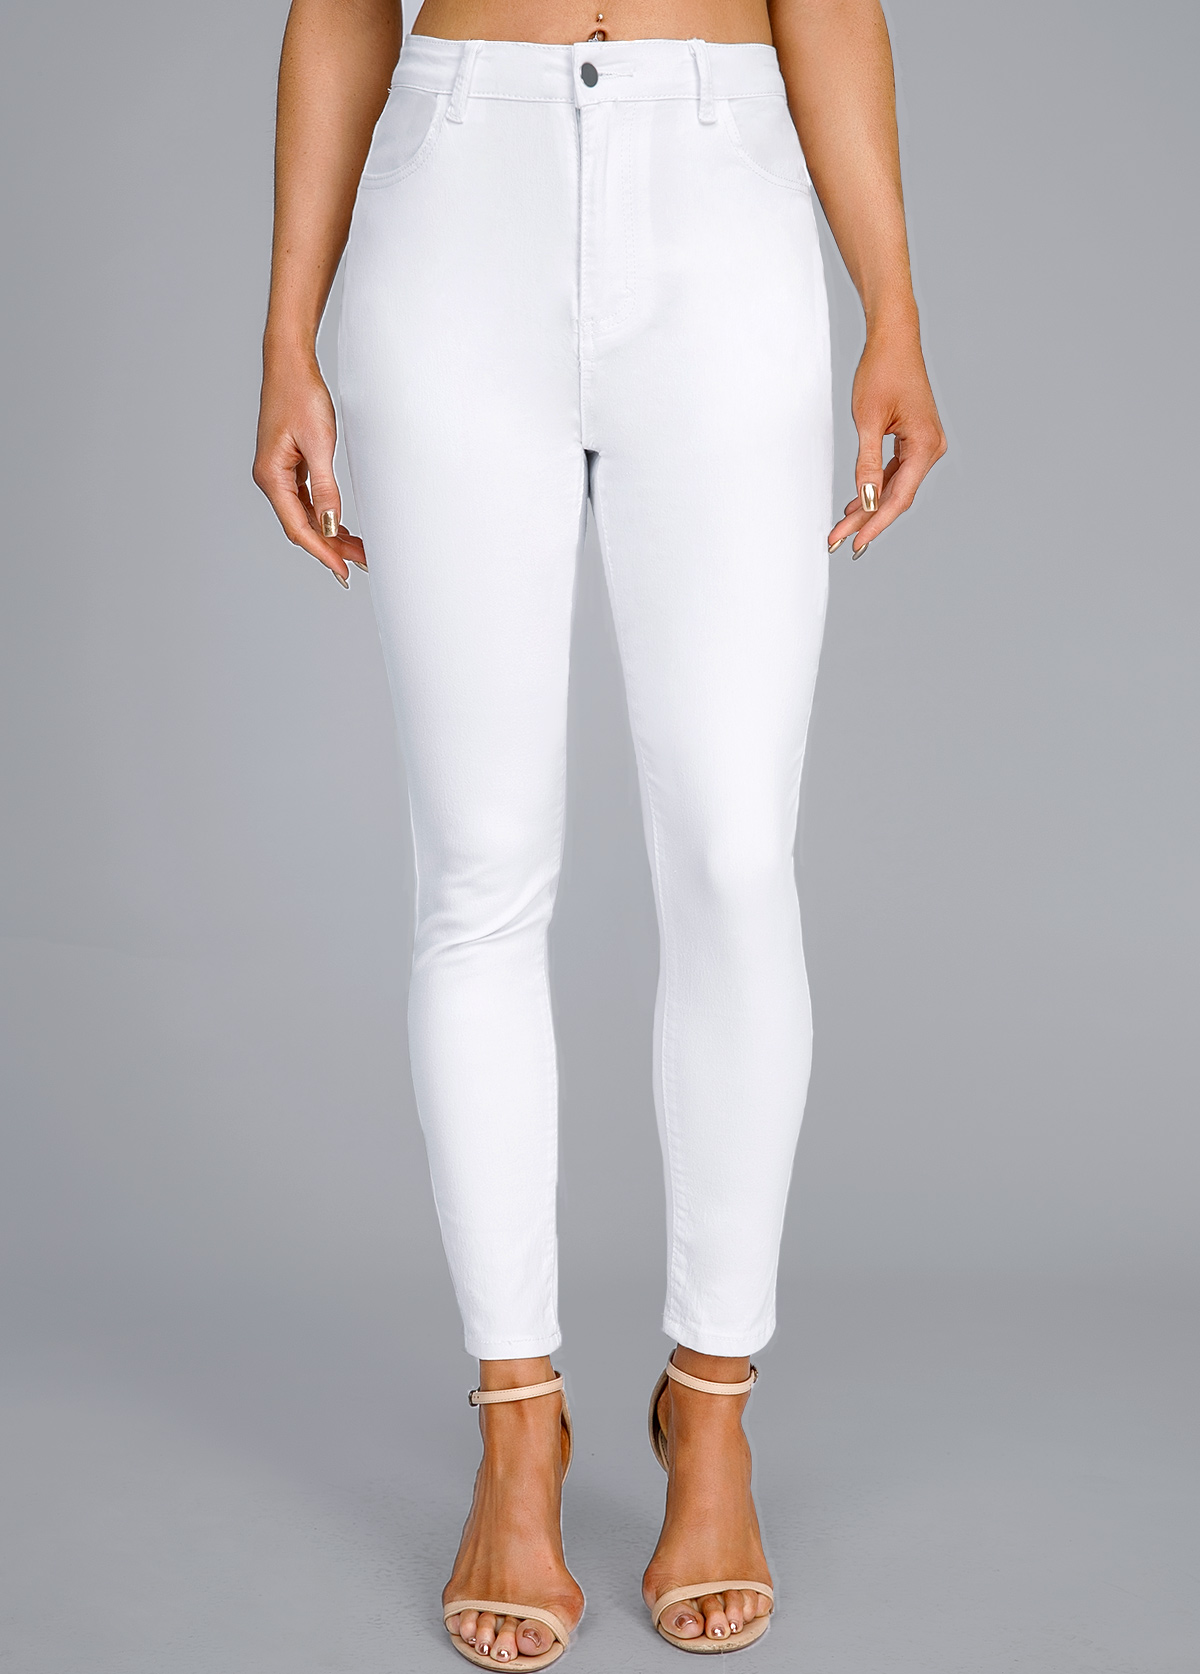 White High Waisted Button Fly Leggings